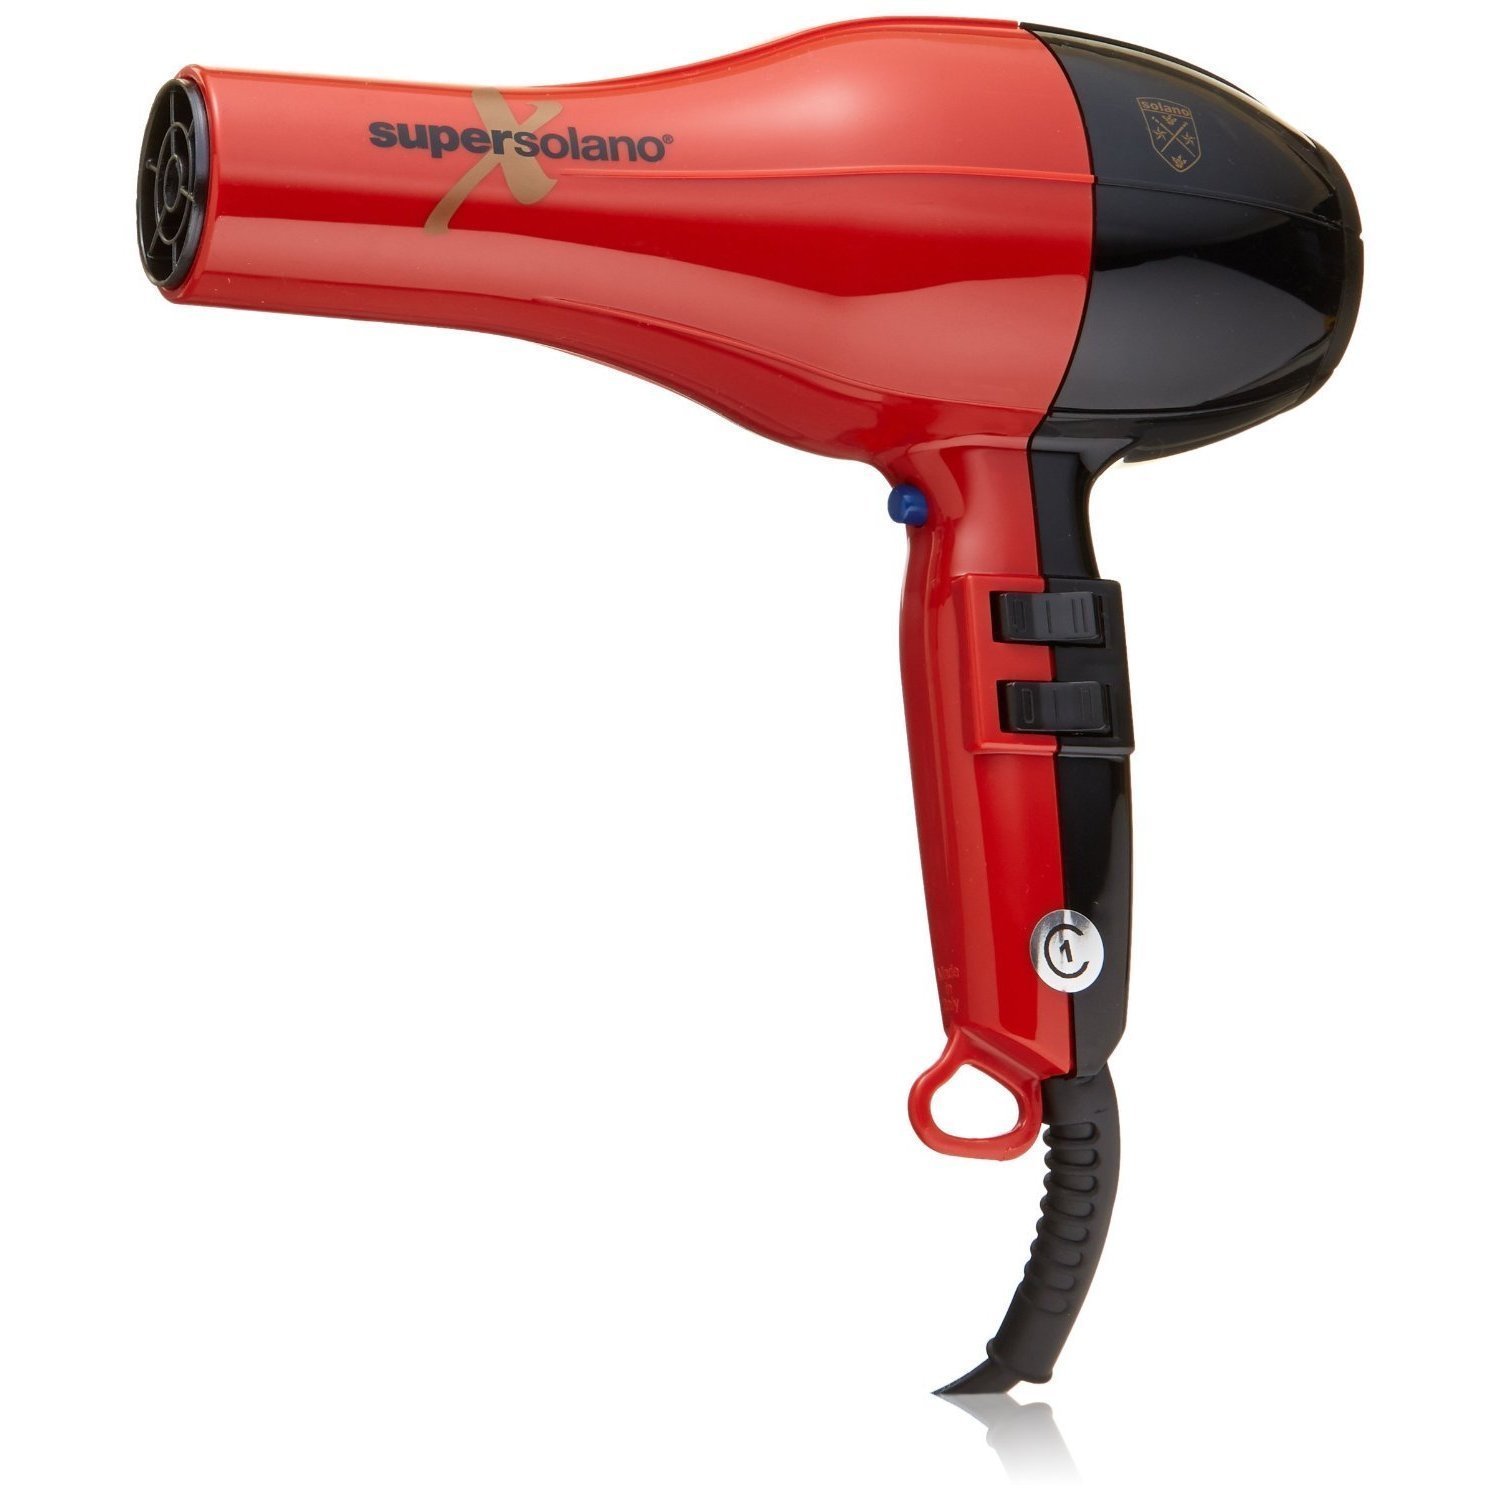 Super Solano Hair Dryer Hair Care Compare Prices At Nextag